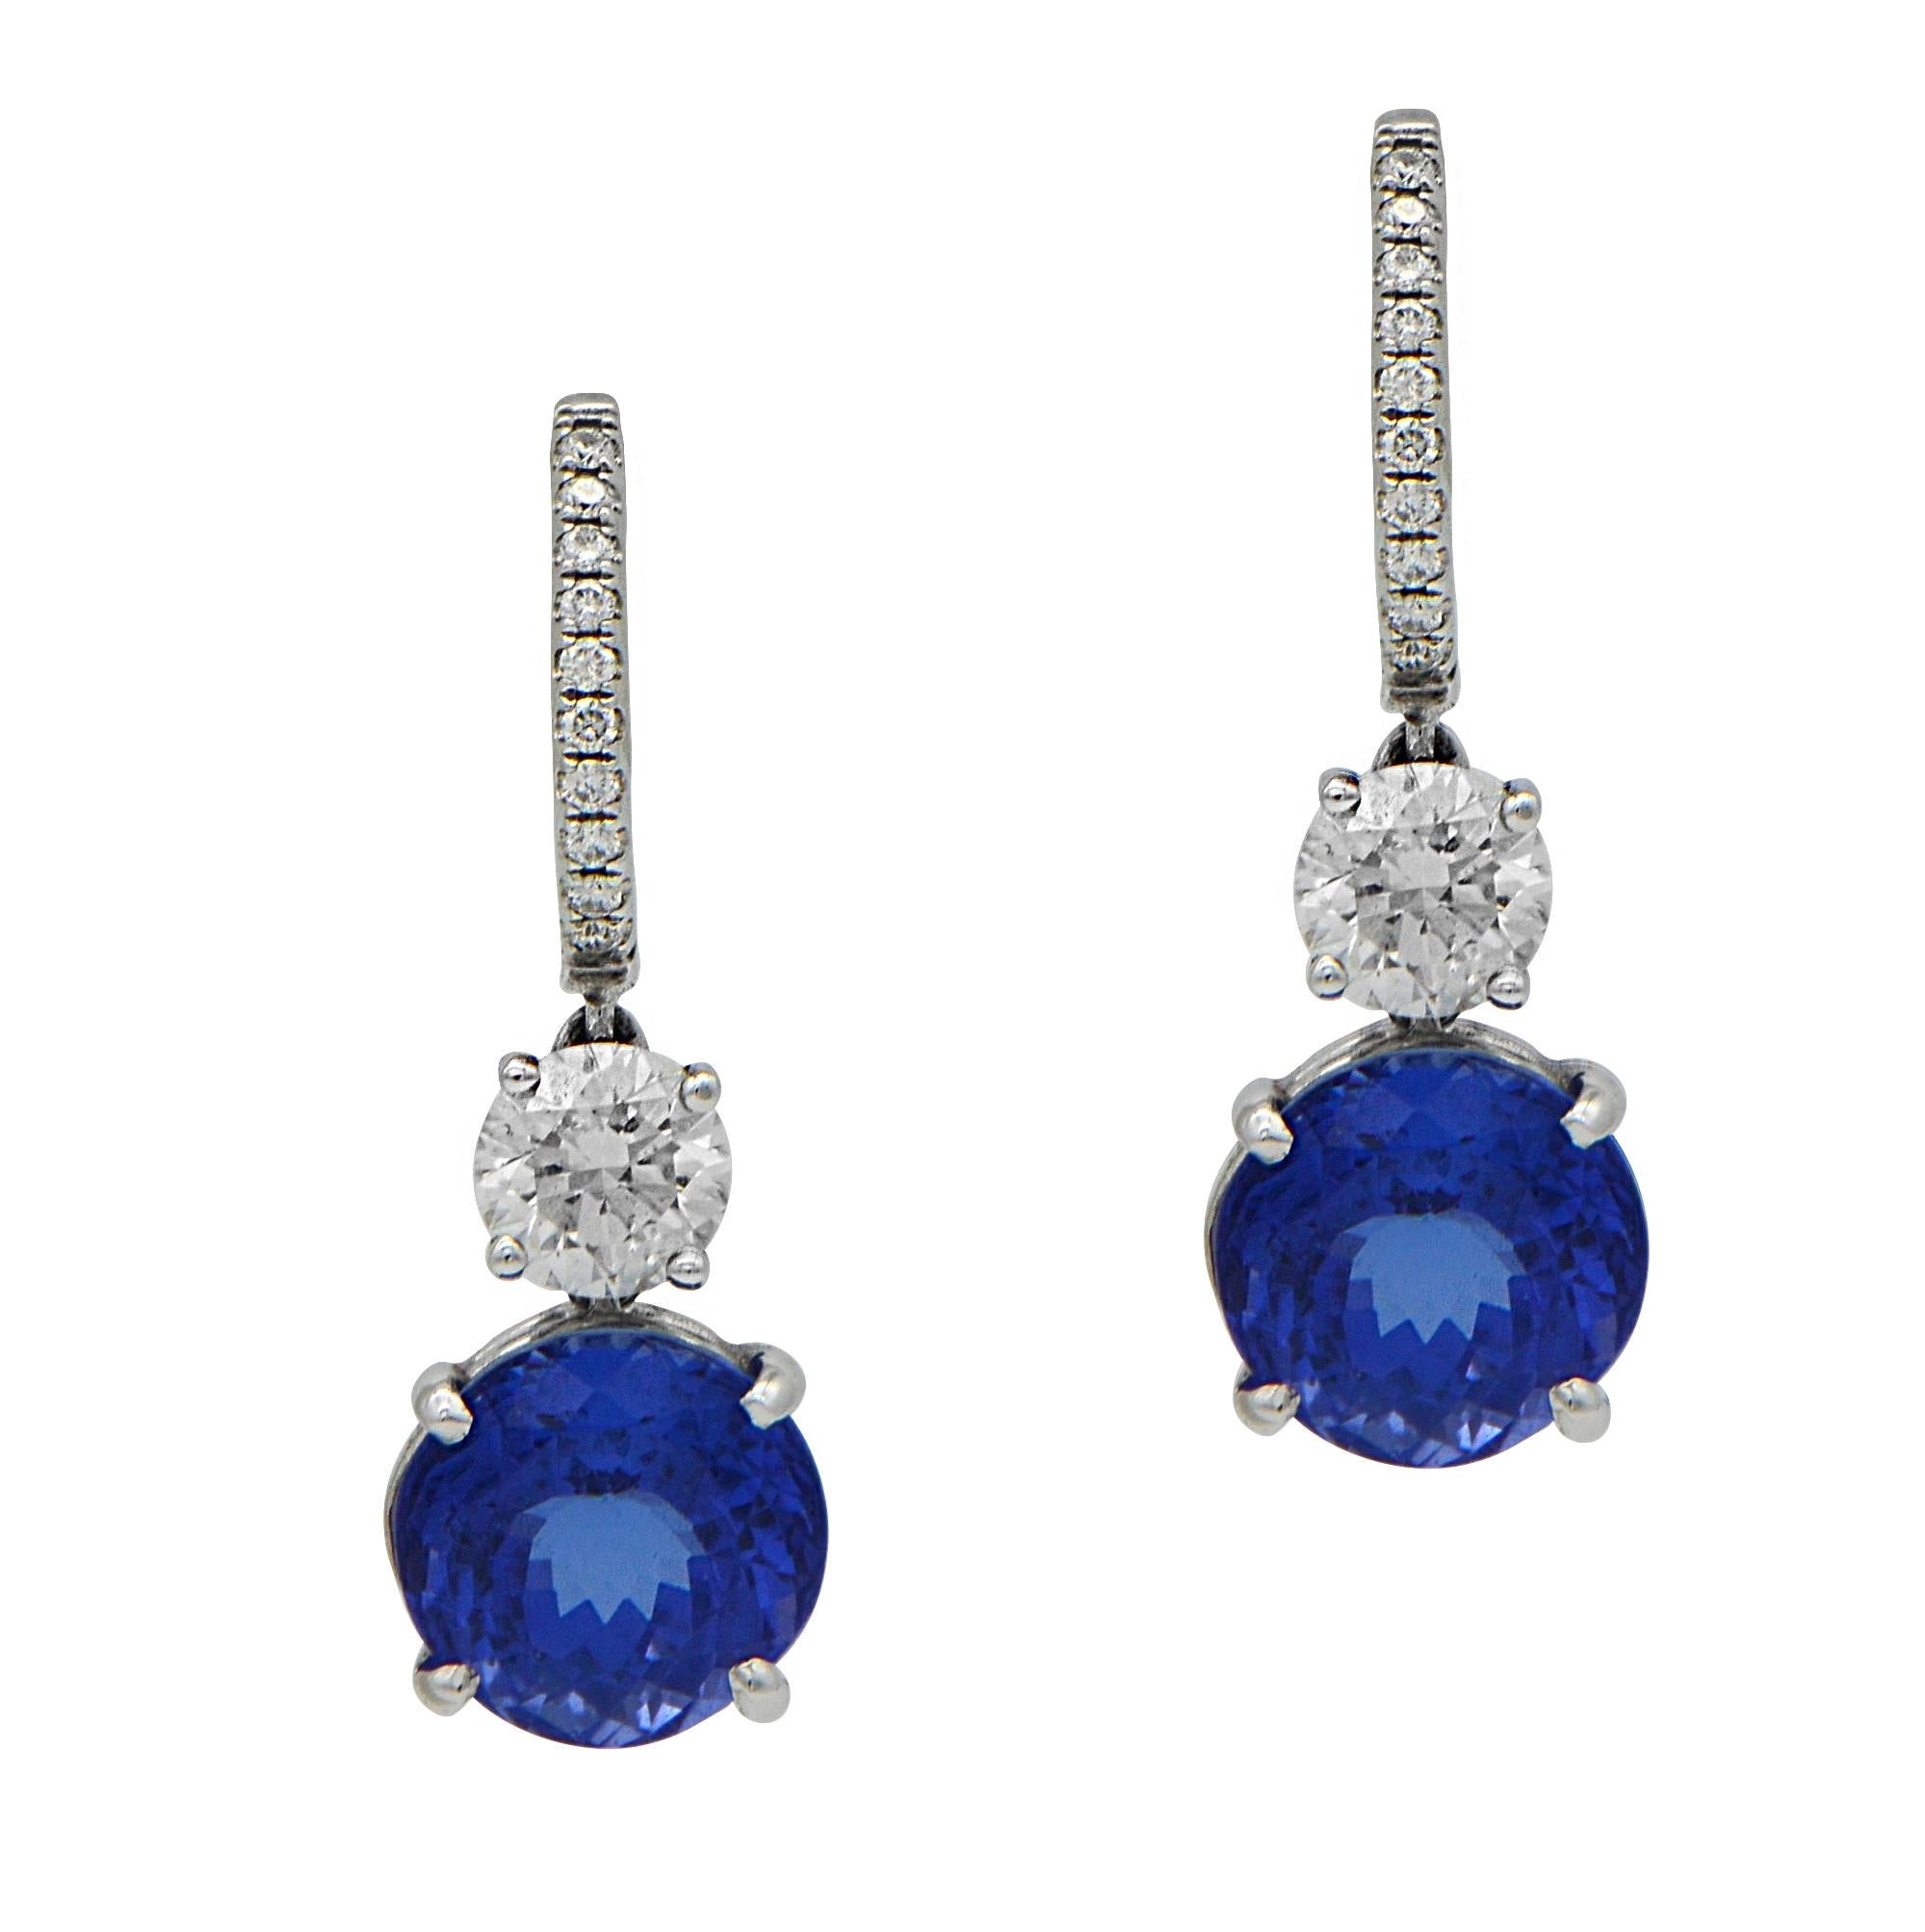 8.90 Total Carat Tanzanite and Diamond Drop Earrings in 18K White Gold

Tanzanite is a unique stone with a very special sparkle, and these handcrafted earrings display that sparkle perfectly! Handmade by our expert jewelers from the finest